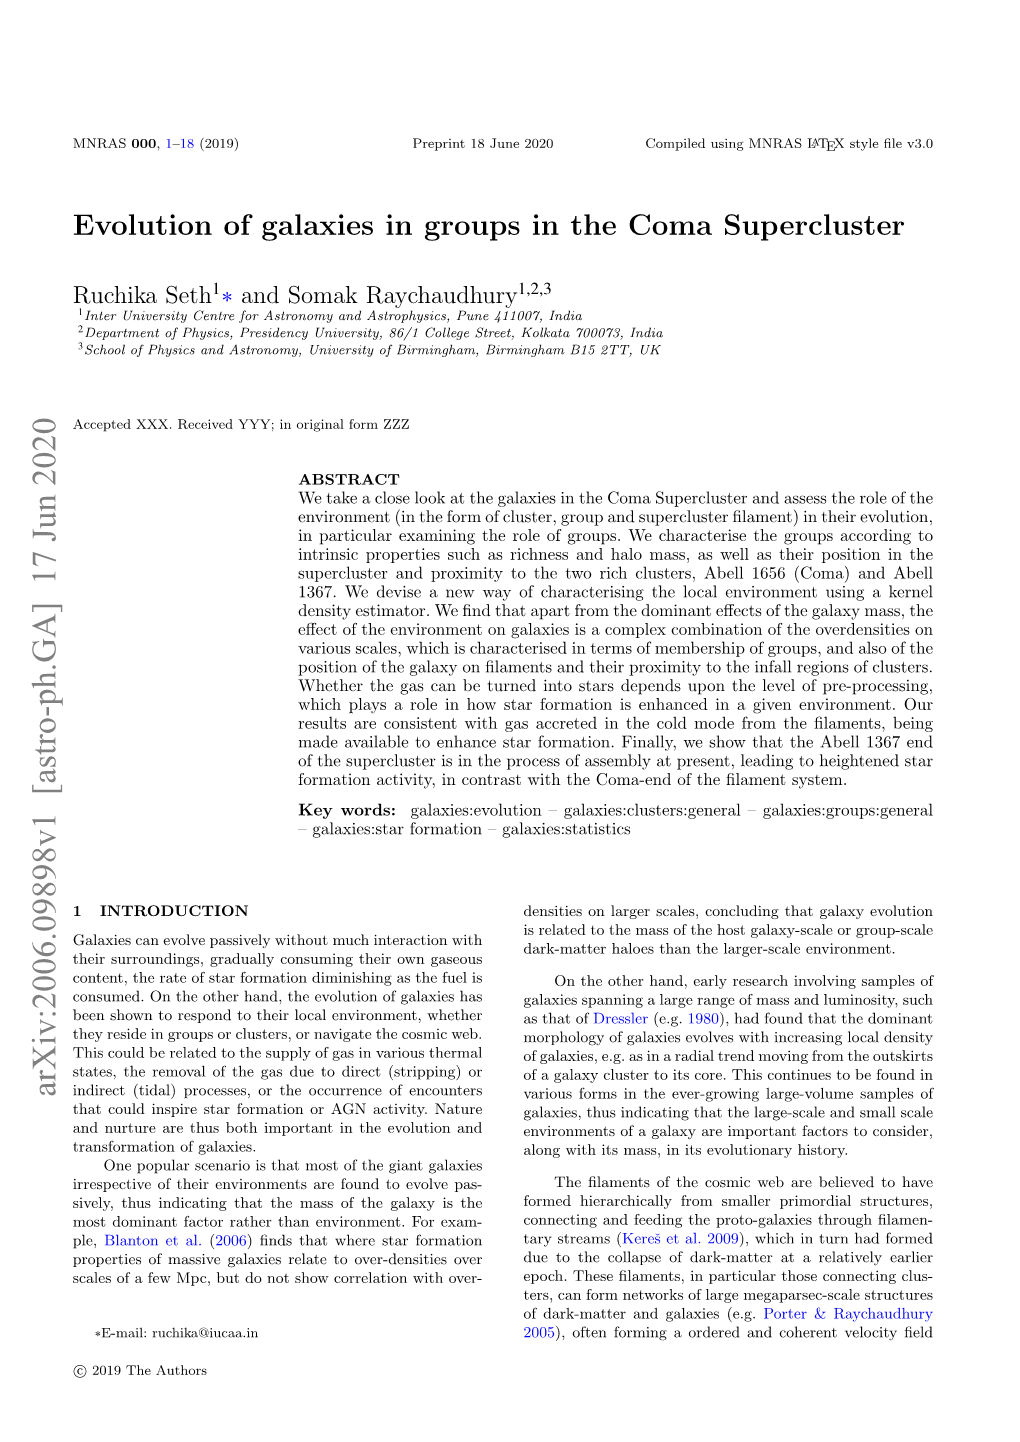 Evolution of Galaxies in Groups in the Coma Supercluster